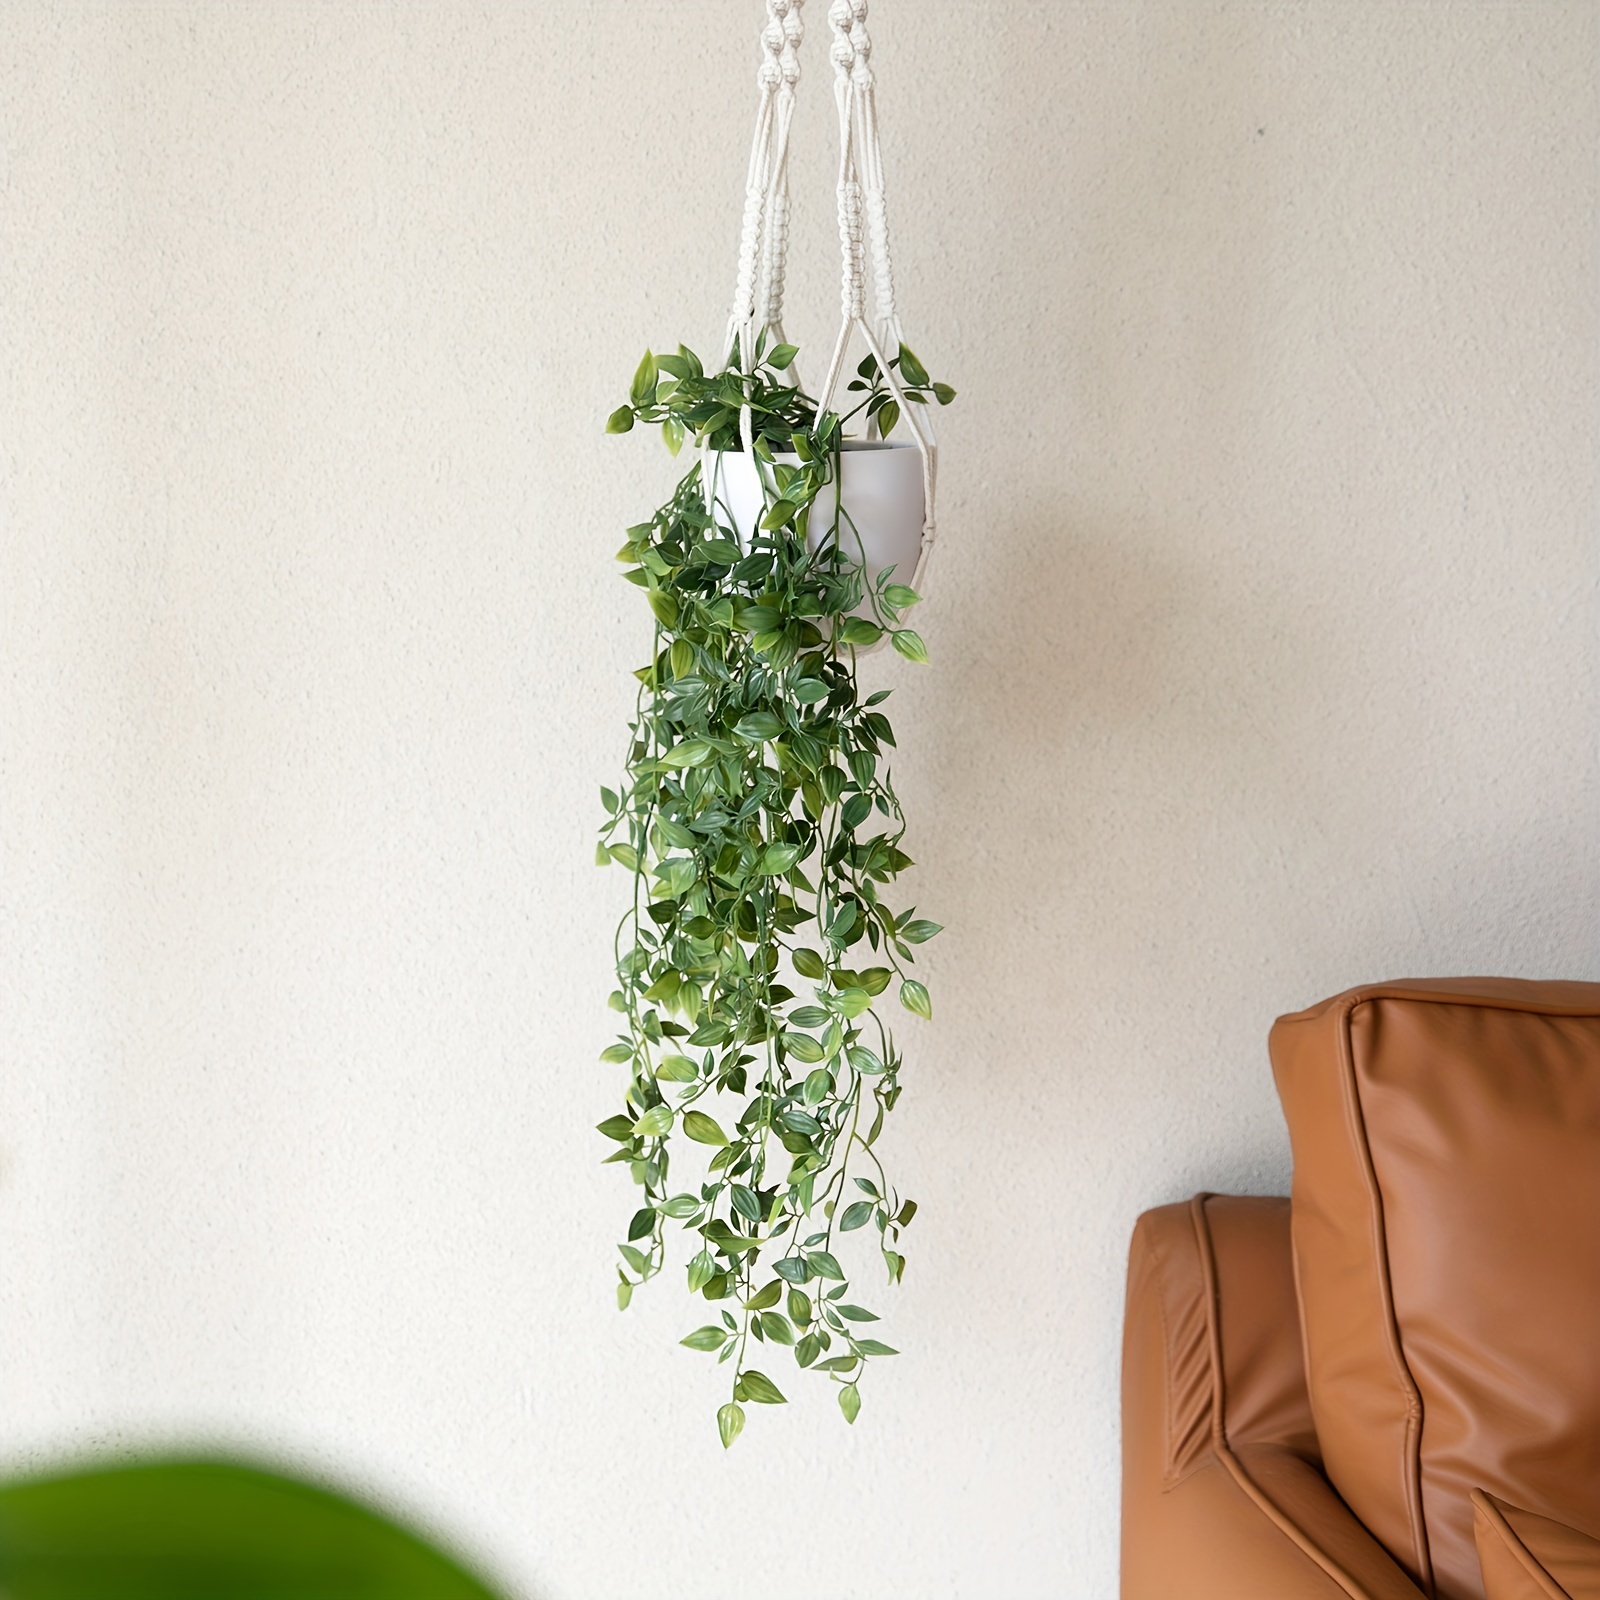 Ikea Artificial Plants (With woven macrame plant hanger), Furniture & Home  Living, Home Decor, Artificial Plants & Flowers on Carousell